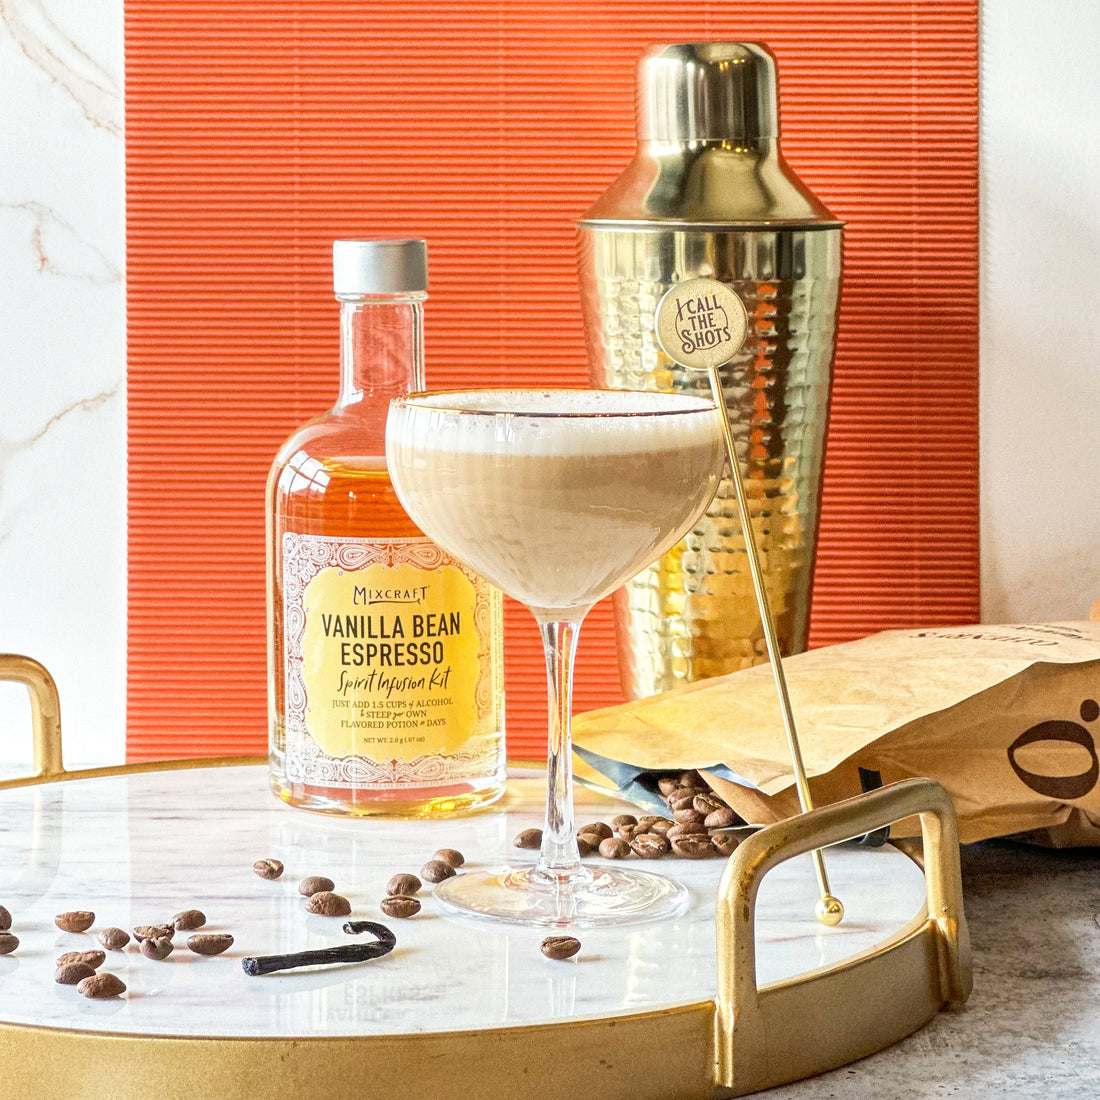 The "Dark Vision" cocktail is made with the Vanilla Bean Espresso Spirit Infusion Kit